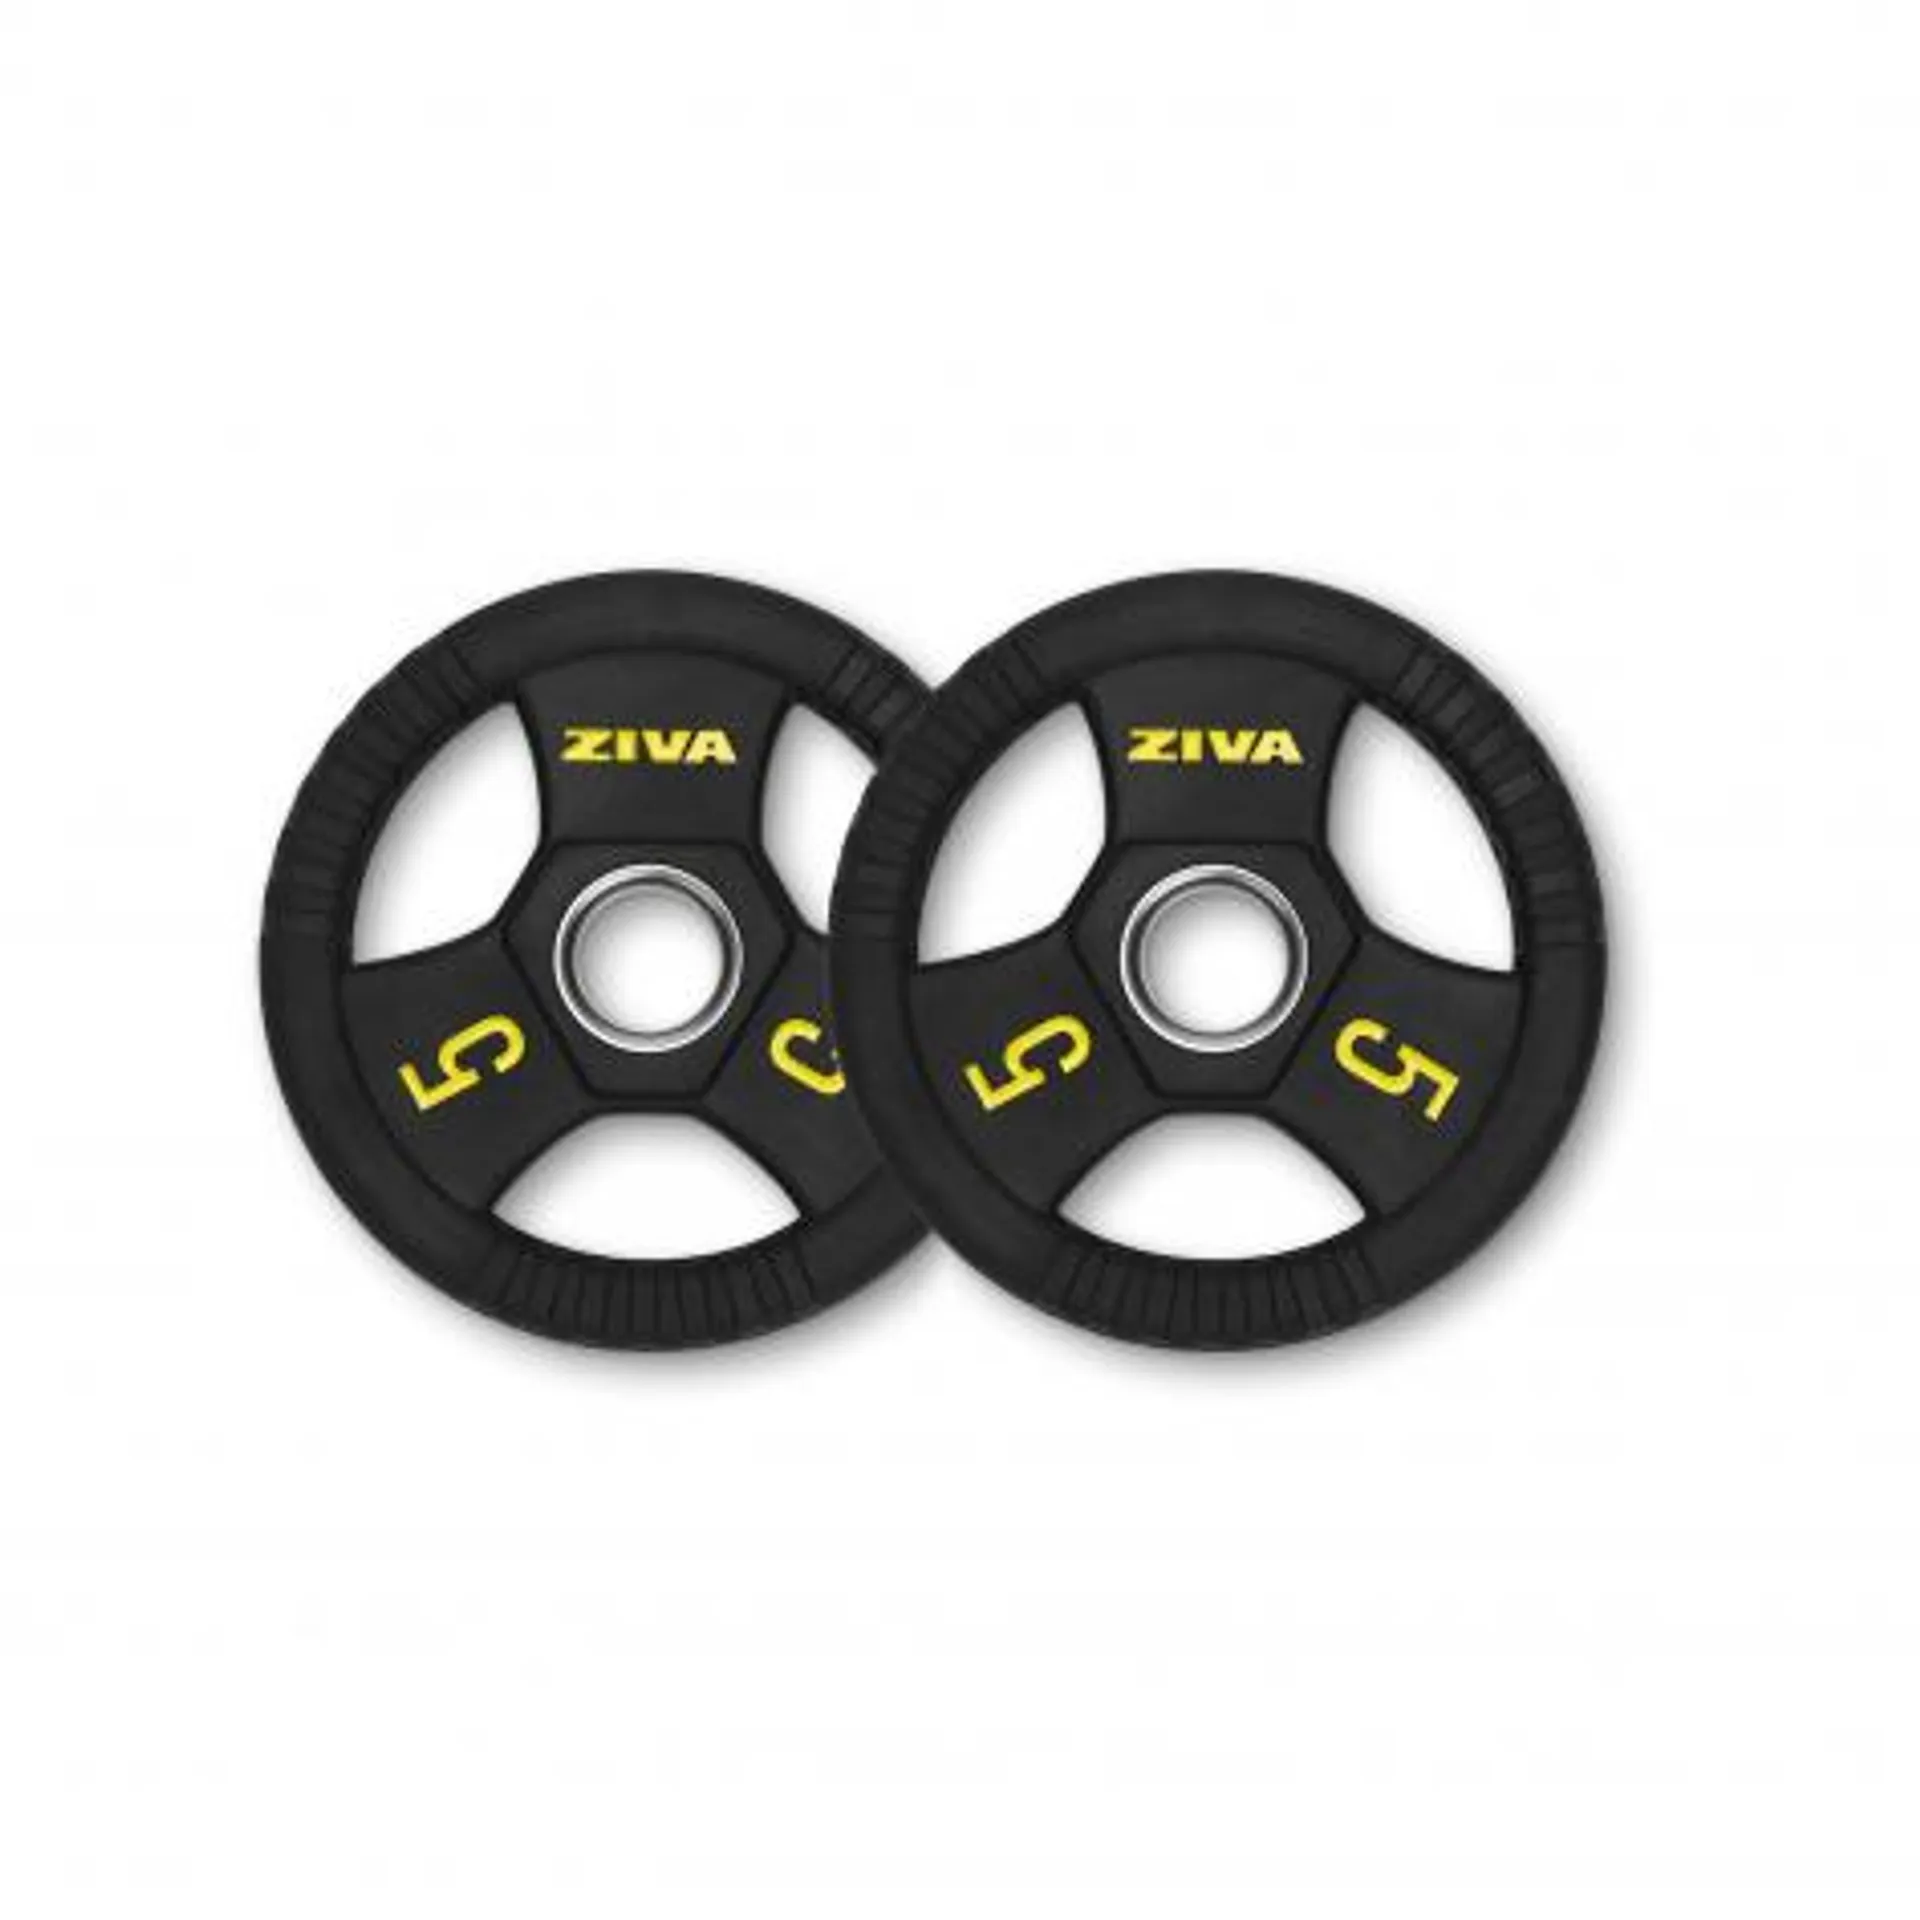 Ziva 5Kg Performance Rubber Grip Olympic Disc (x2)